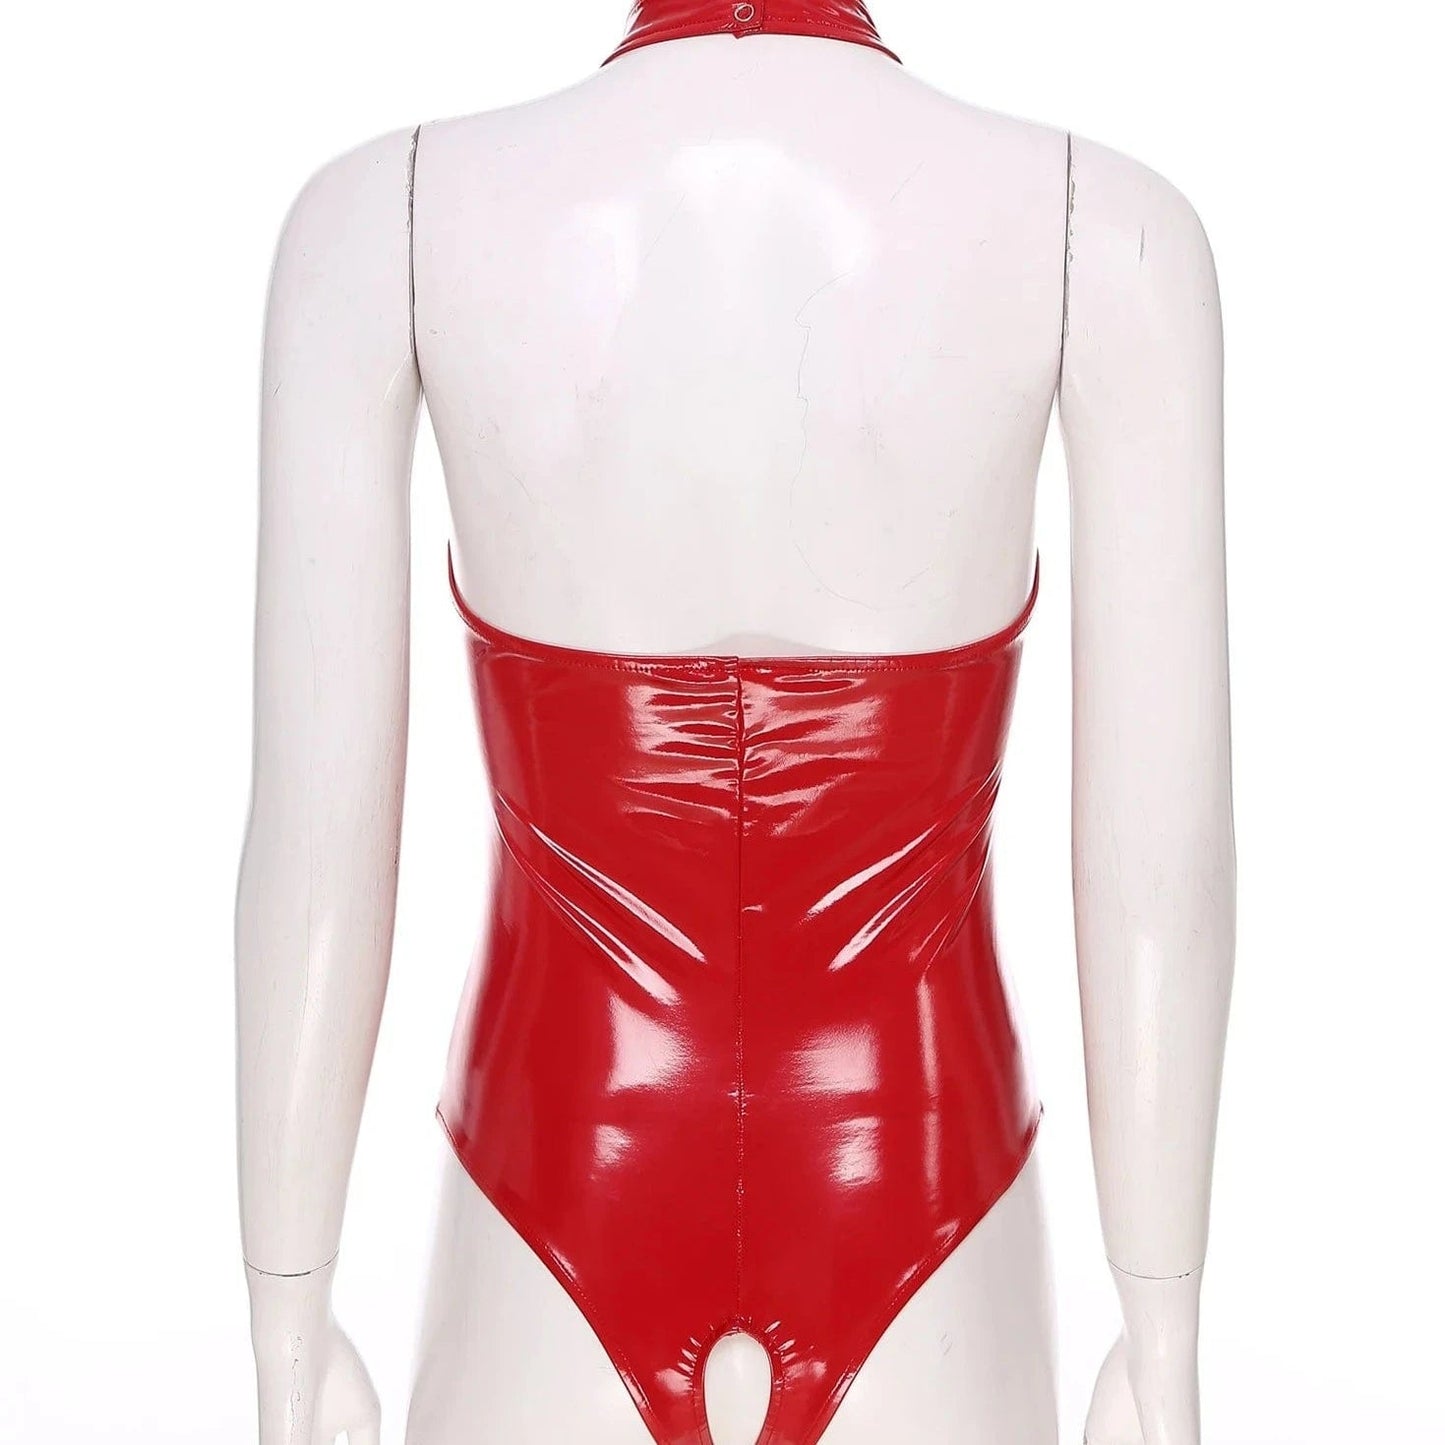 Kinky Cloth Open Bust Patent Leather Bodysuit